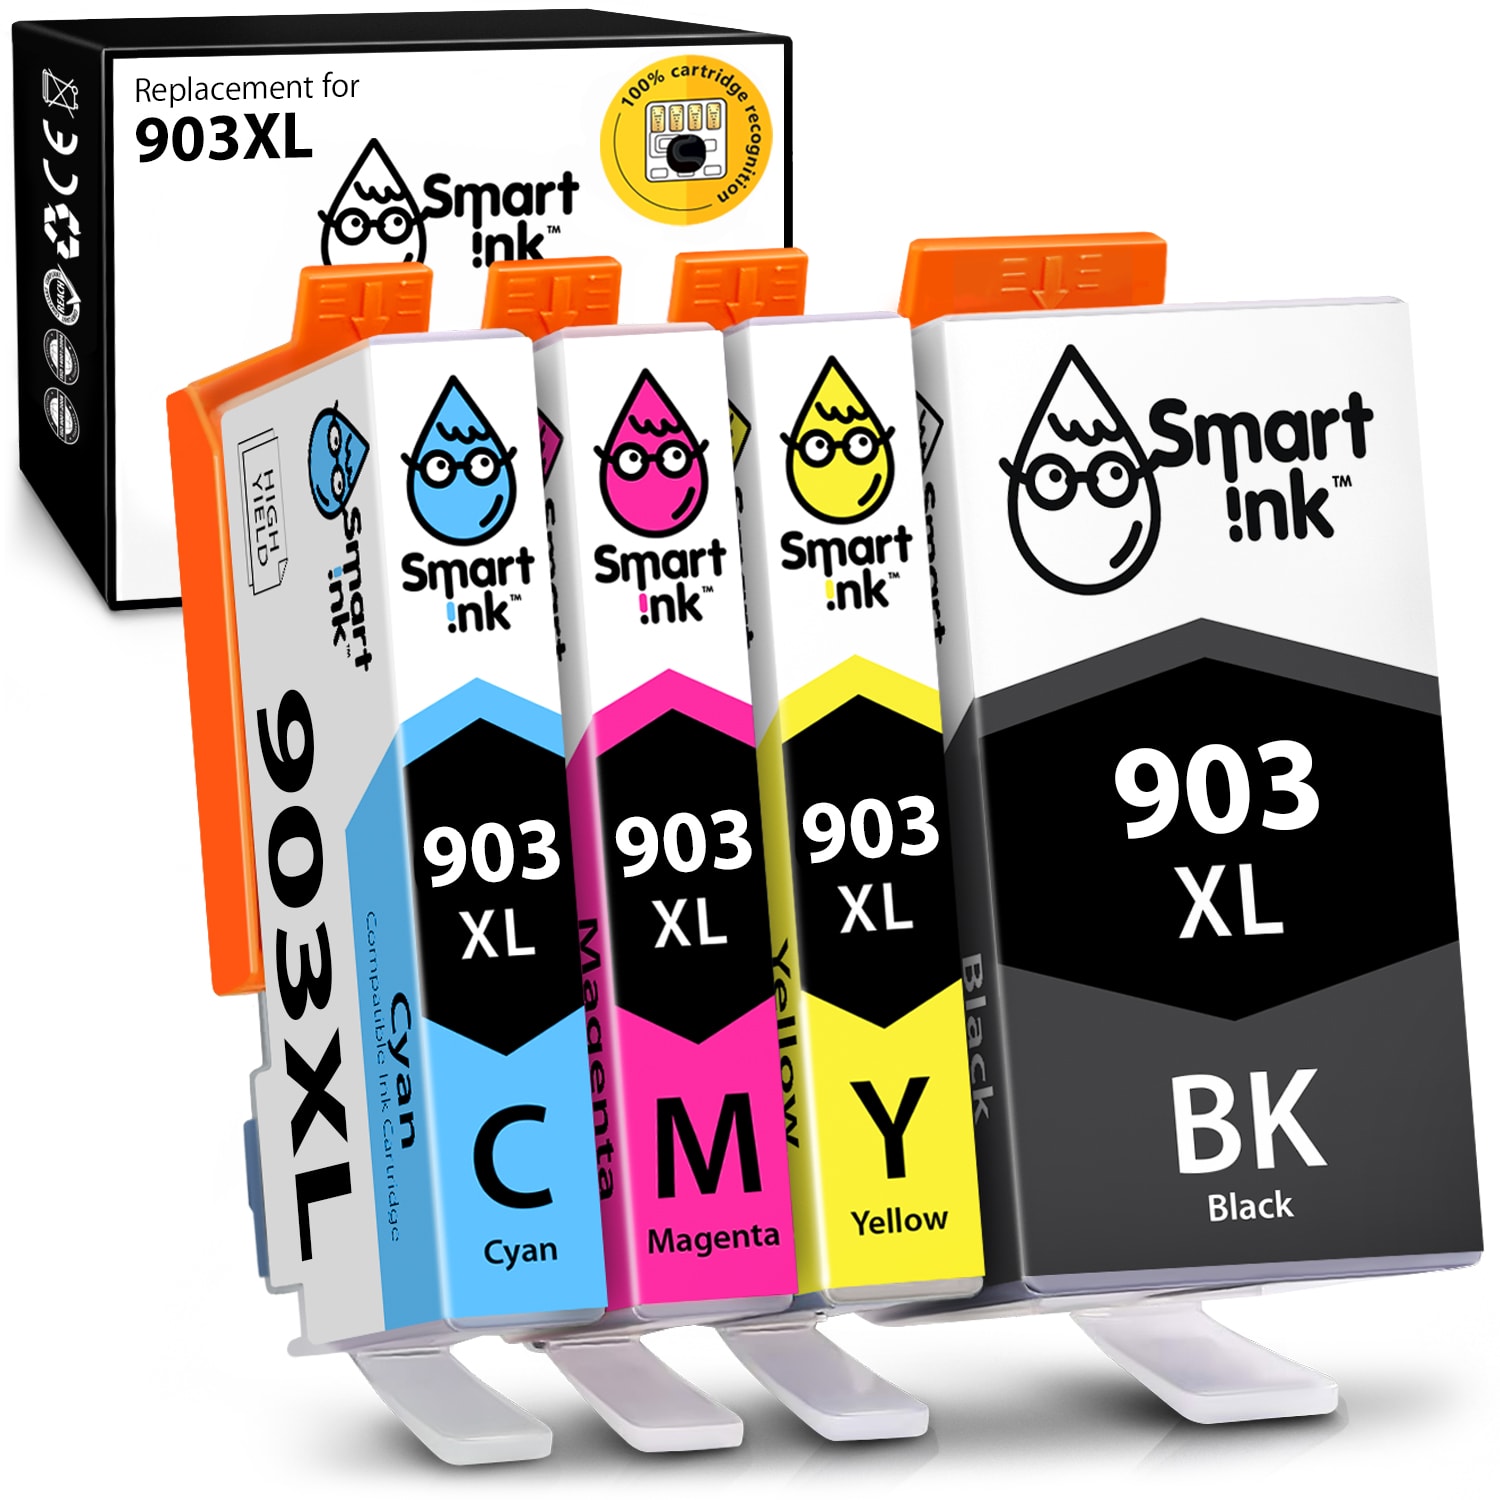 Compatible Ink Cartridge Replacement for HP 903 XL (4 pack), Smart Ink